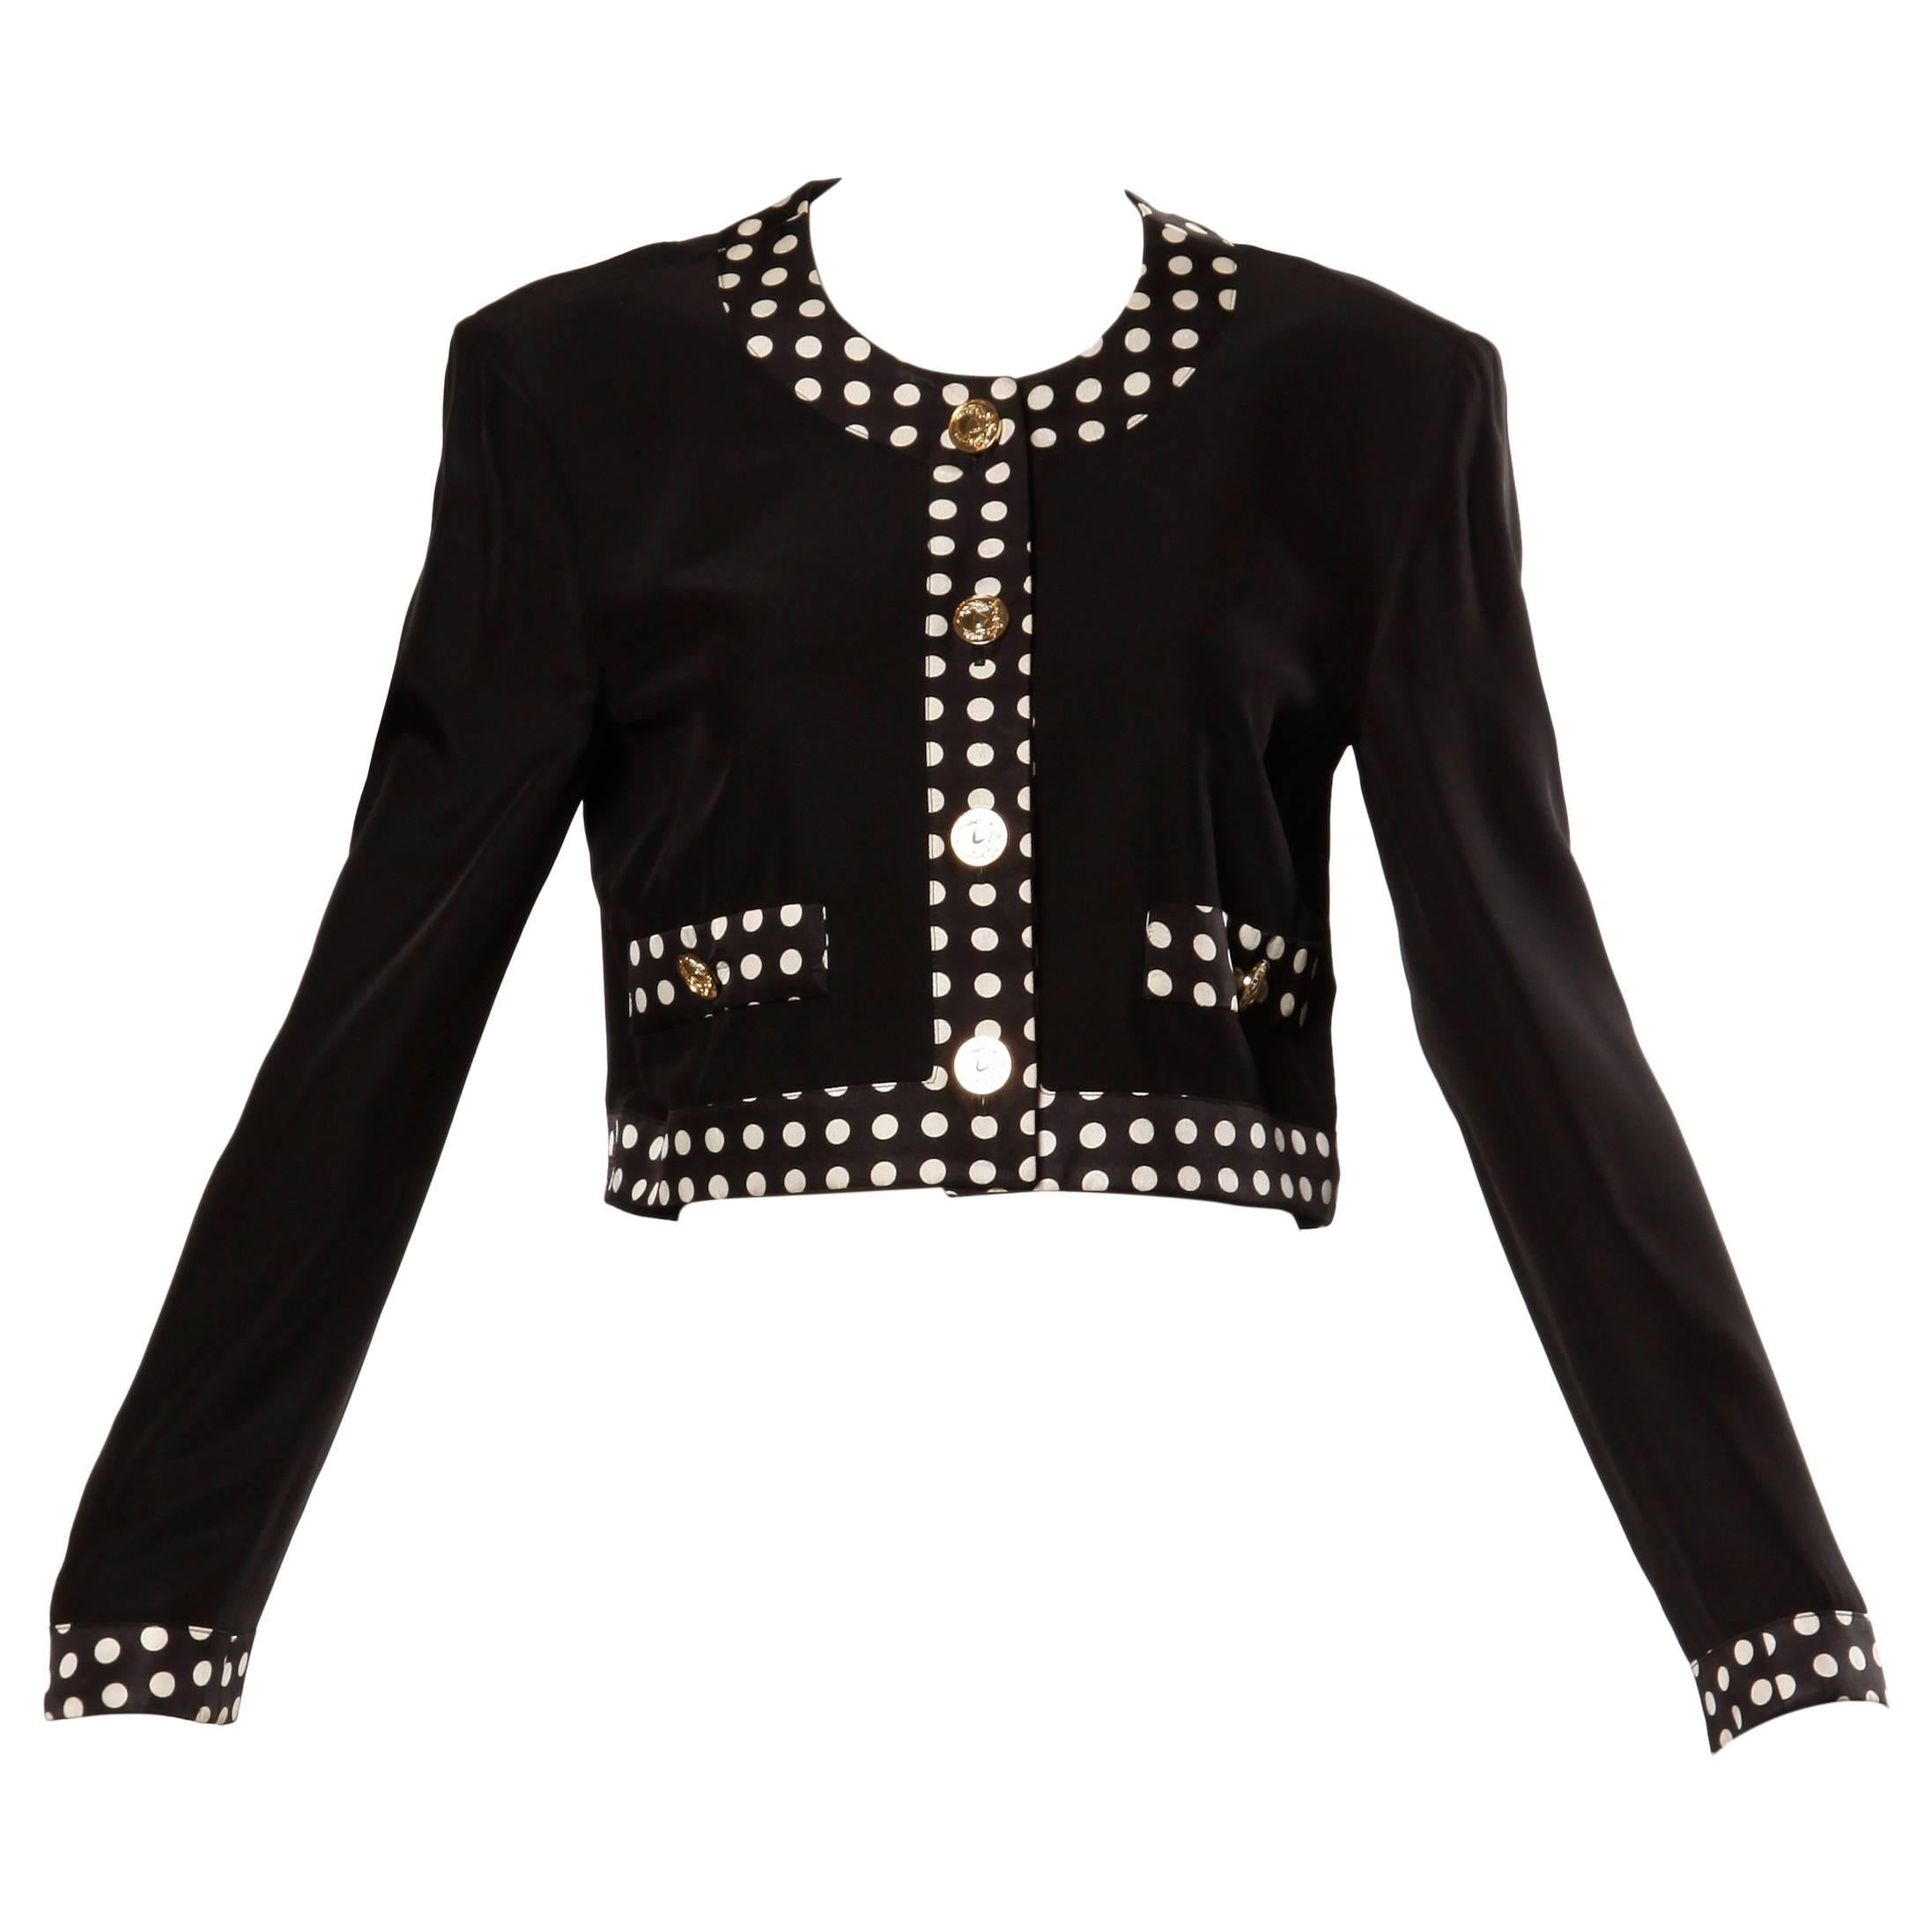 Moschino Vintage 90s Black + White Polka Dot Jacket with Gold Buttons